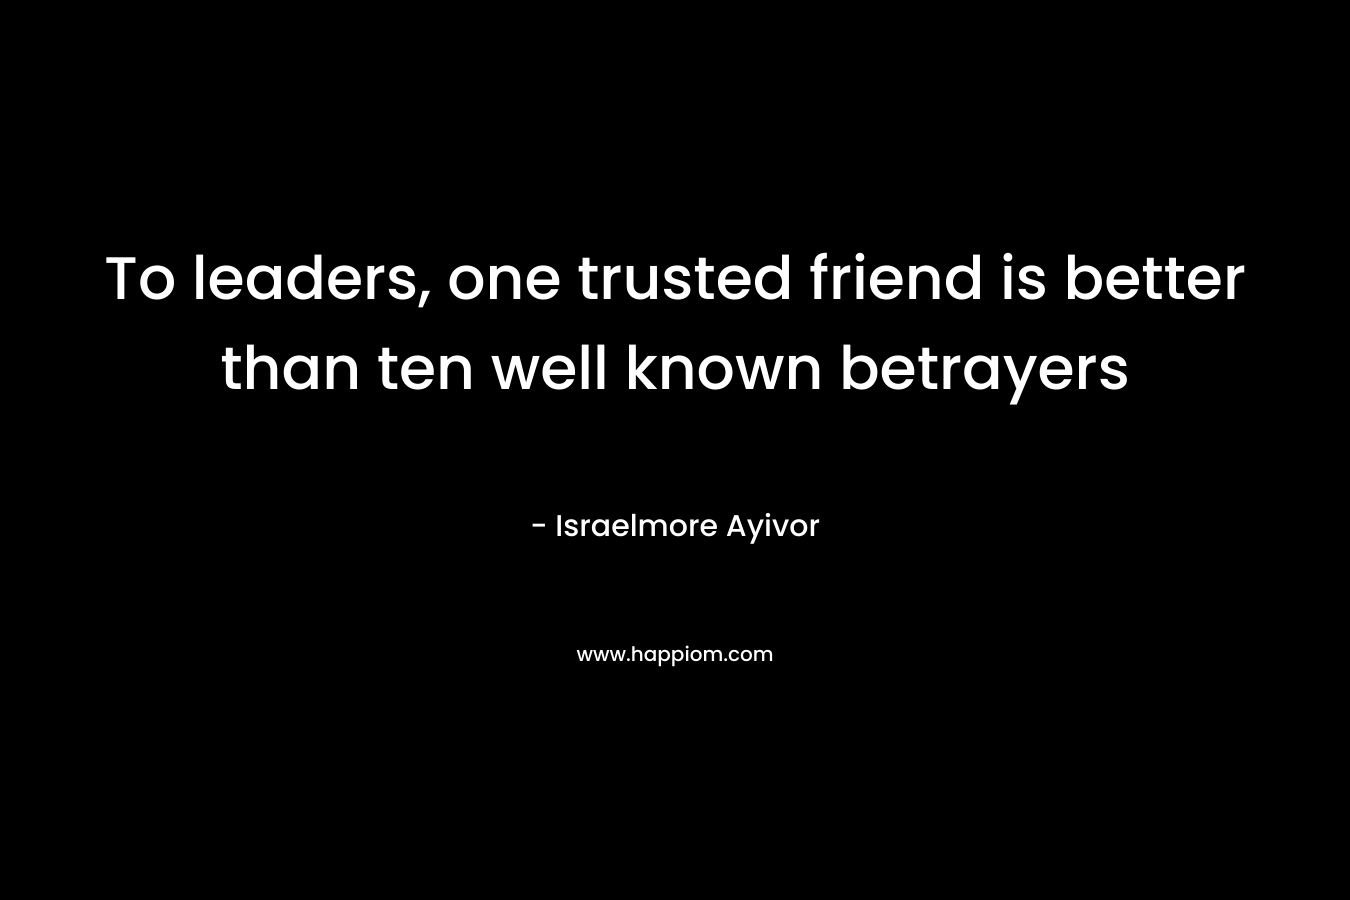 To leaders, one trusted friend is better than ten well known betrayers